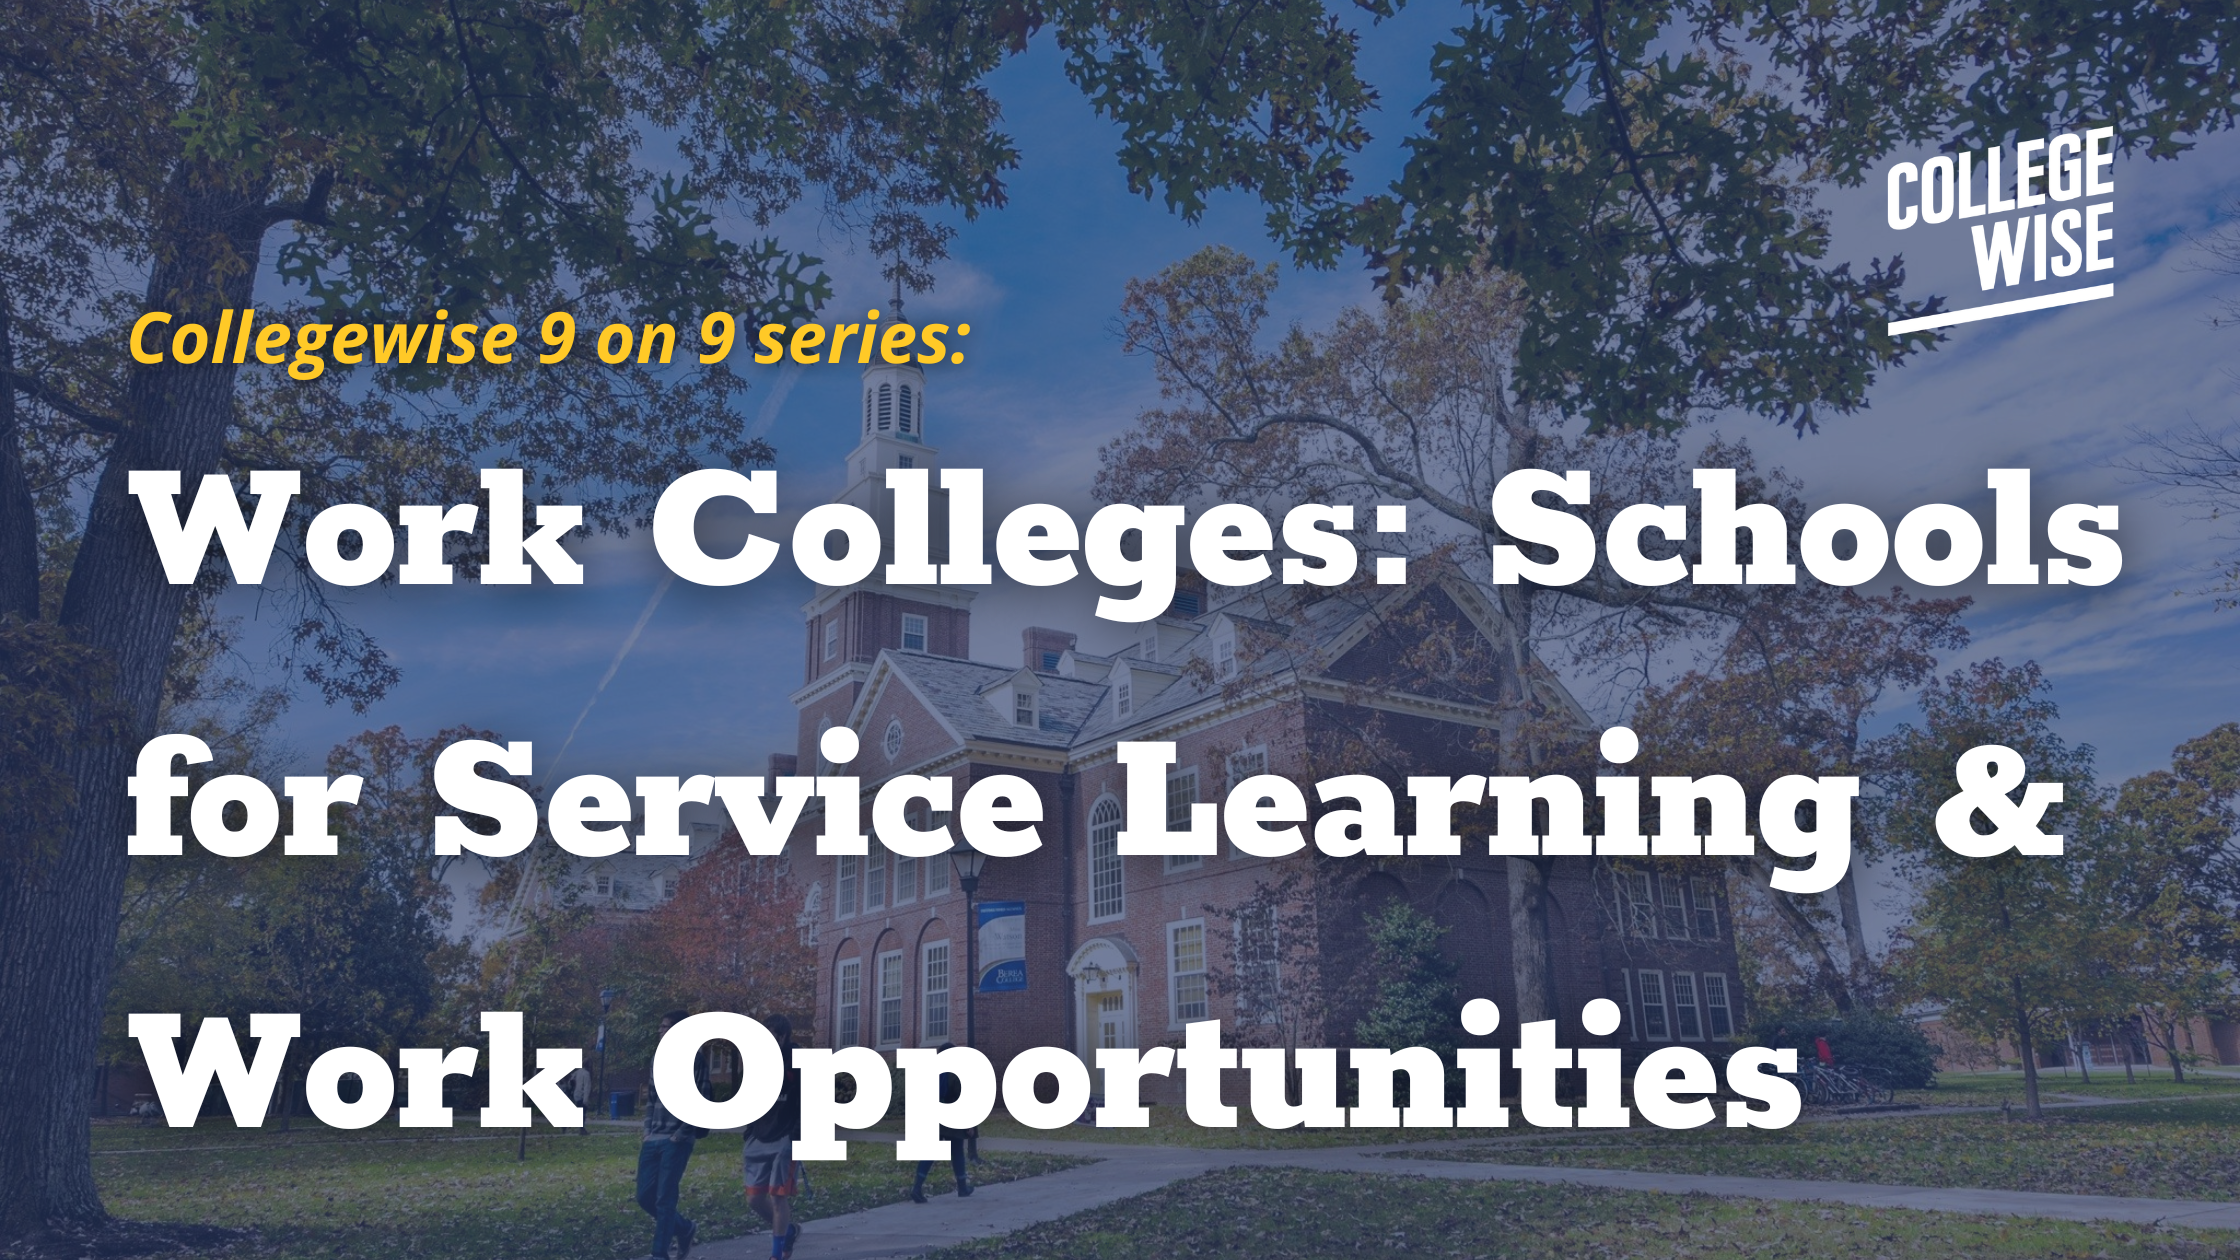 Work Colleges: Schools for Service Learning & Work Opportunities